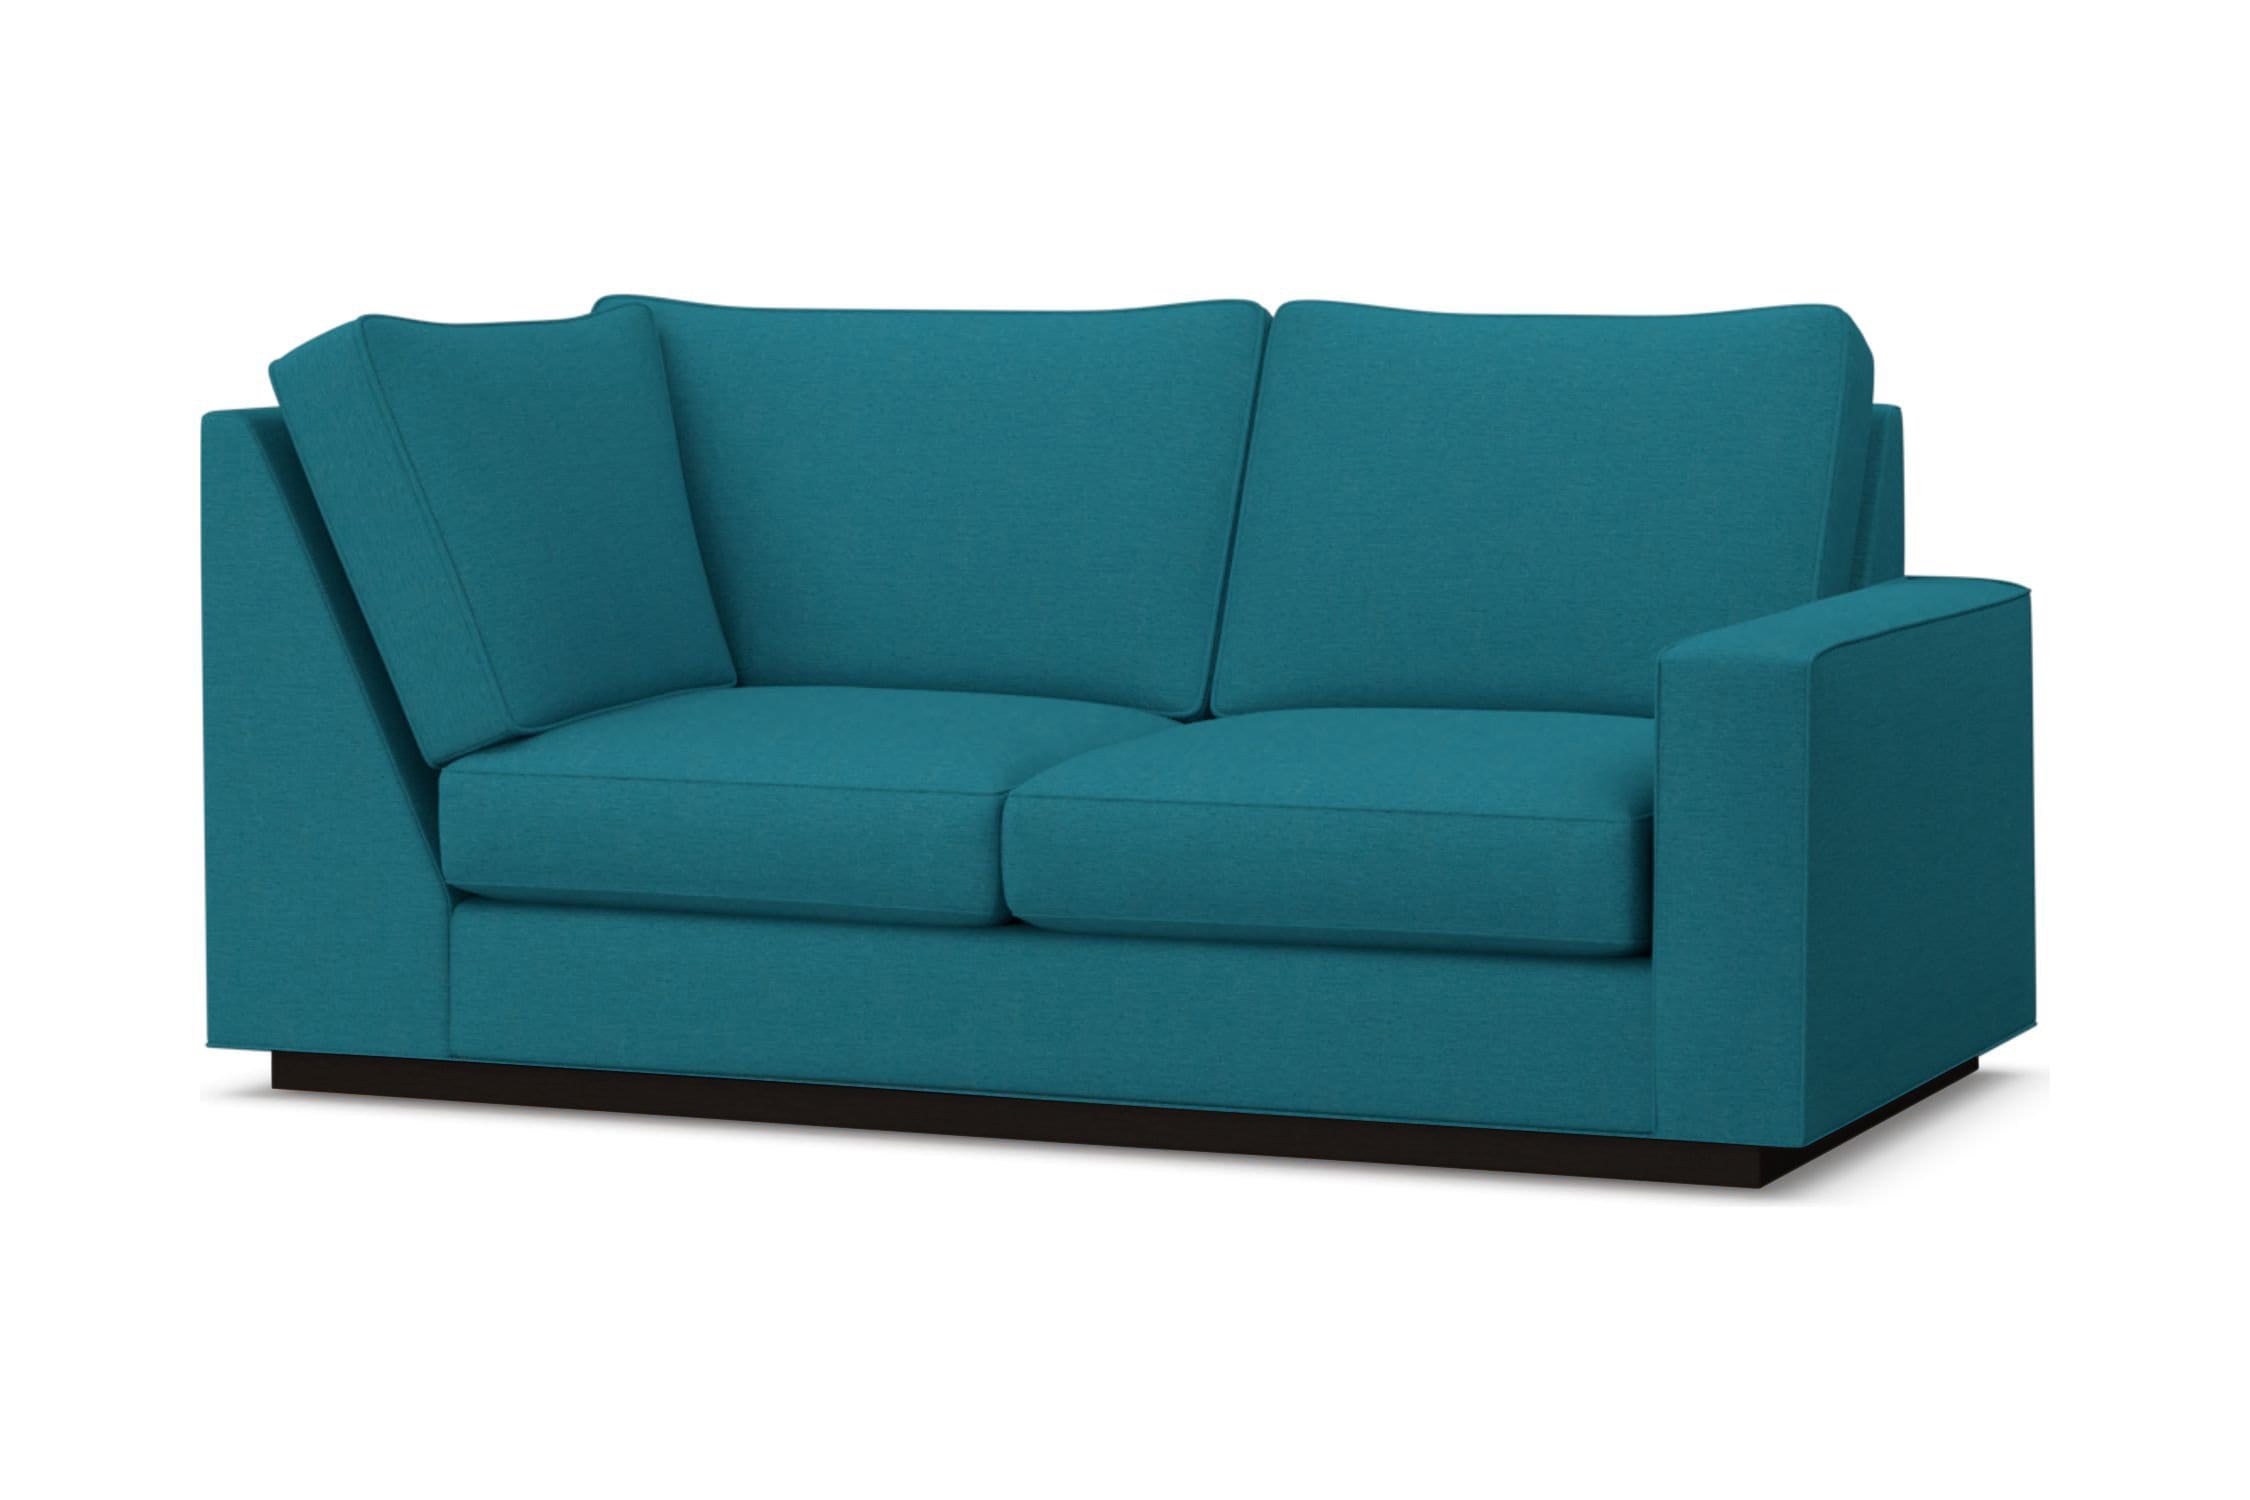 Harper Right Arm Corner Loveseat - Blue -  Modular Collection - Build Your Own Sectional